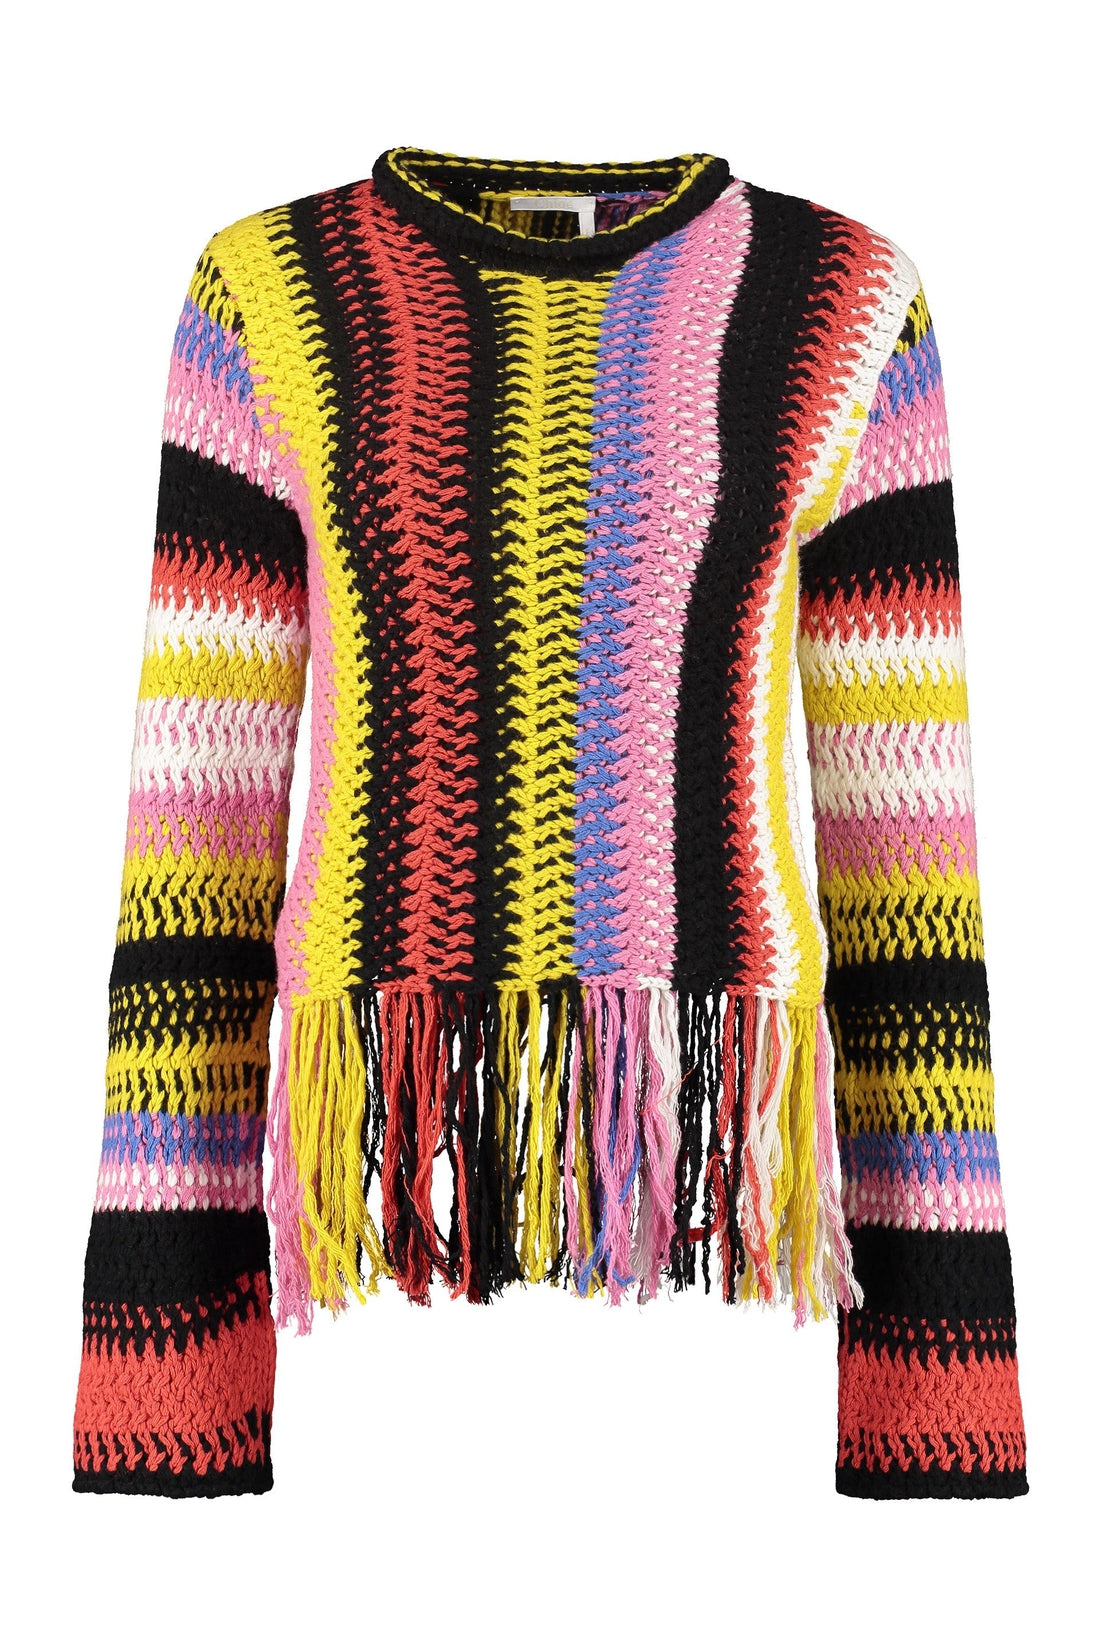 Chloé-OUTLET-SALE-Knit wool pullover-ARCHIVIST